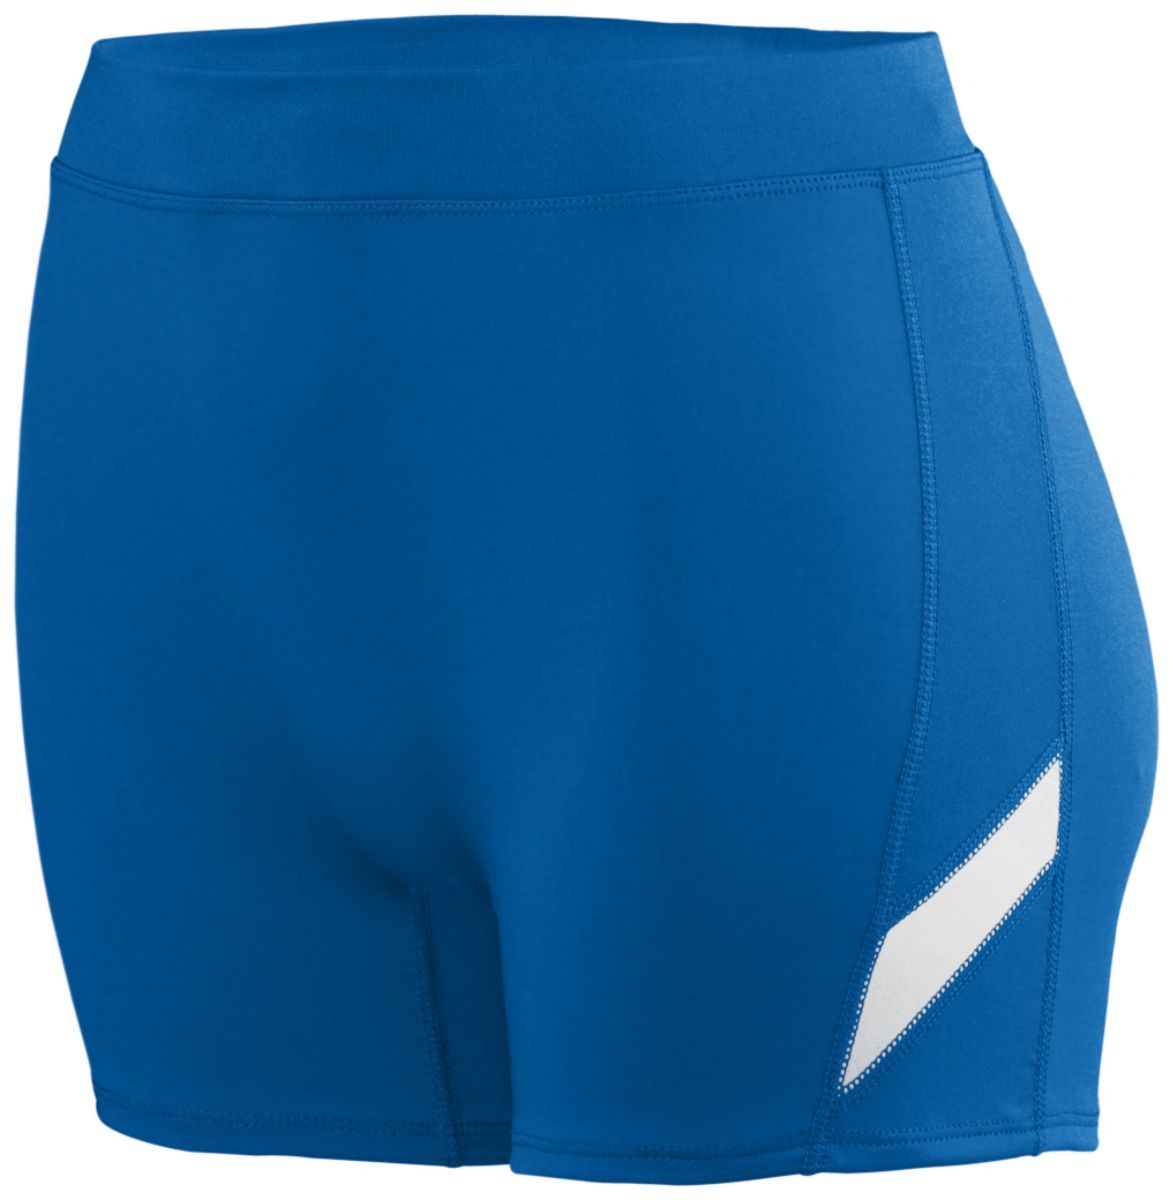 Augusta Sportswear Girls Stride Shorts in Royal/White  -Part of the Girls, Augusta-Products, Volleyball, Girls-Shorts product lines at KanaleyCreations.com